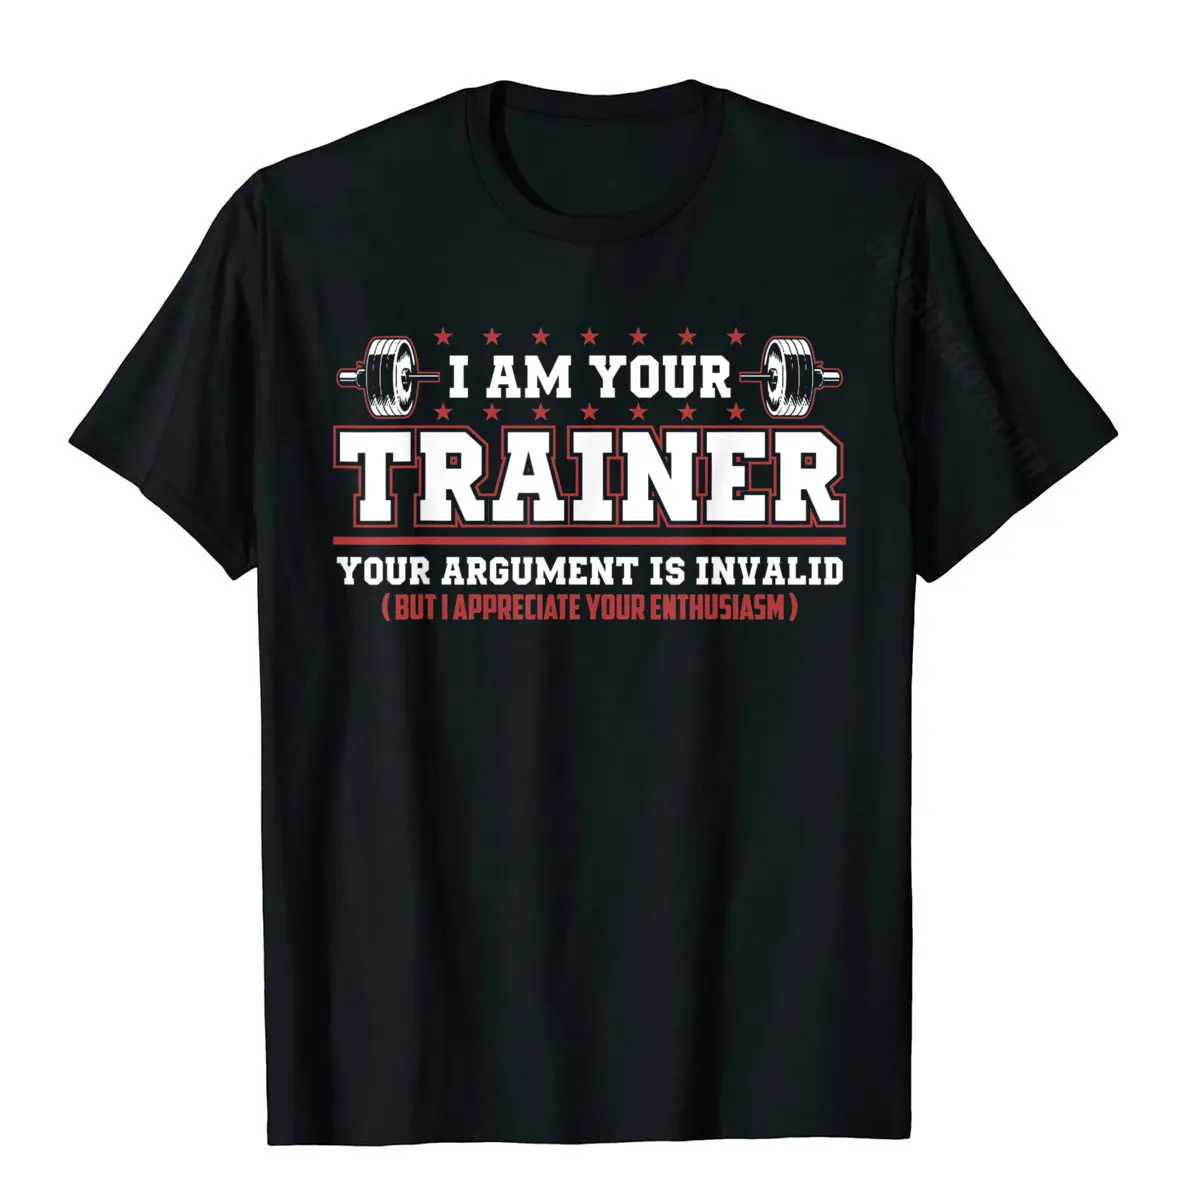 Funny Personal Trainer Shirts I AM YOUR TRAINER T-Shirt Tees Cheap Simple Style Cotton Men T Shirts Simple Style